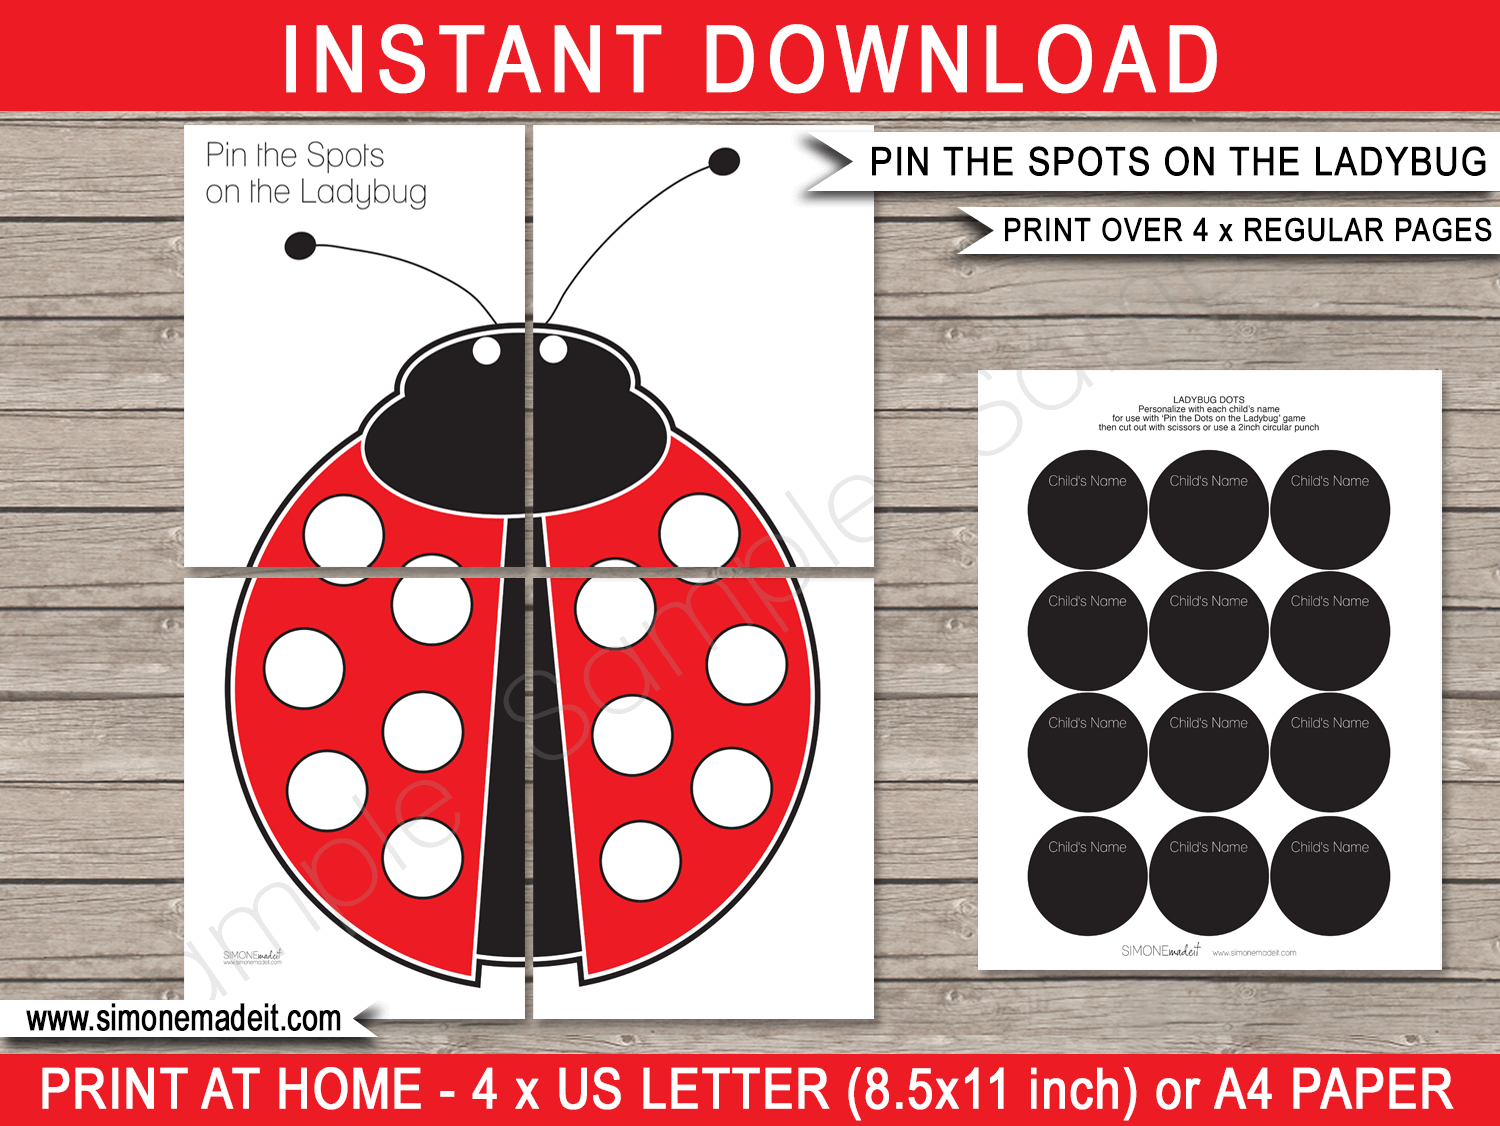 Printable Pin the Spots on the Ladybug Party Game Template | Ladybird Birthday Party Games | DIY Print at Home |  INSTANT DOWNLOAD via simonemadeit.com